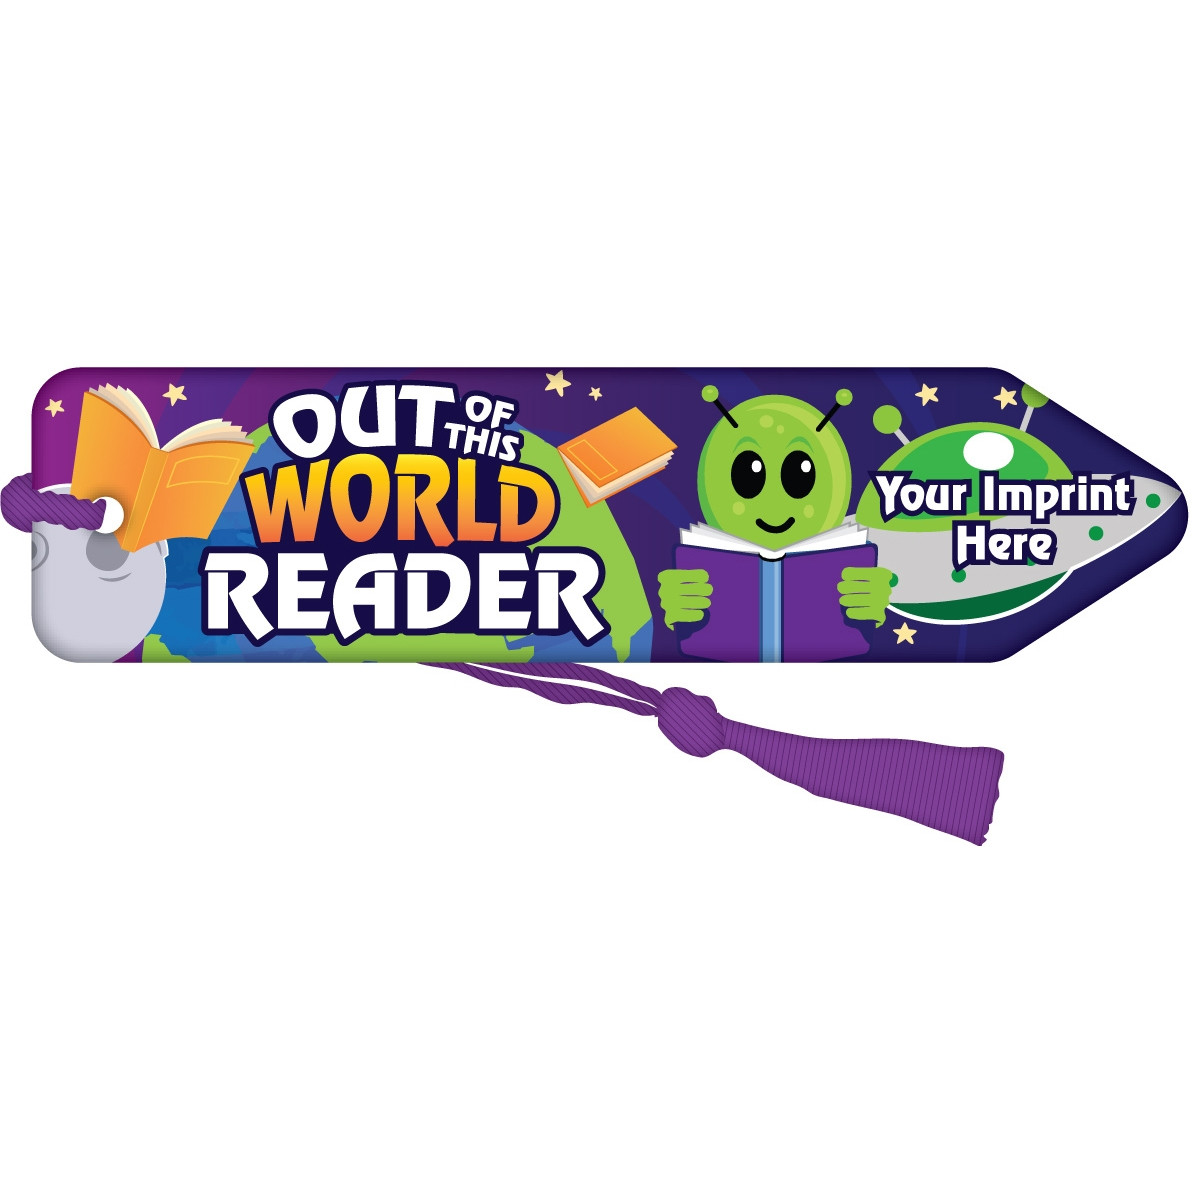 Custom Pencil Bookmark with Purple Tassel - Out Of This World Reader